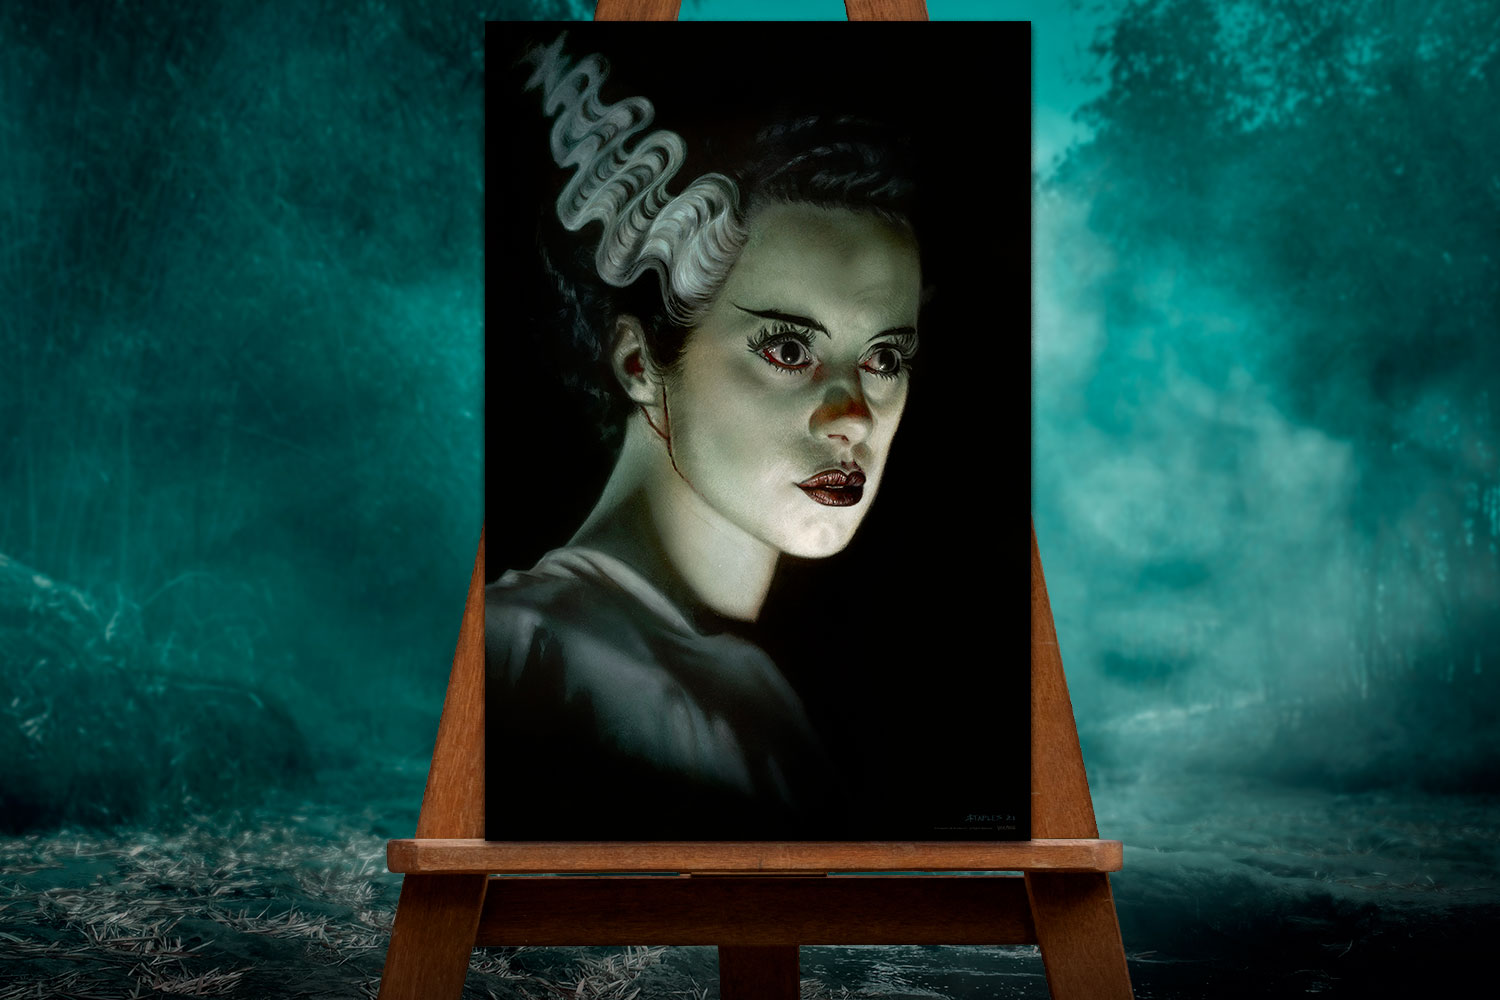 Vice Press Universal Monsters Bride of Frankenstein The Bride of Frankenstein Variant Art Print